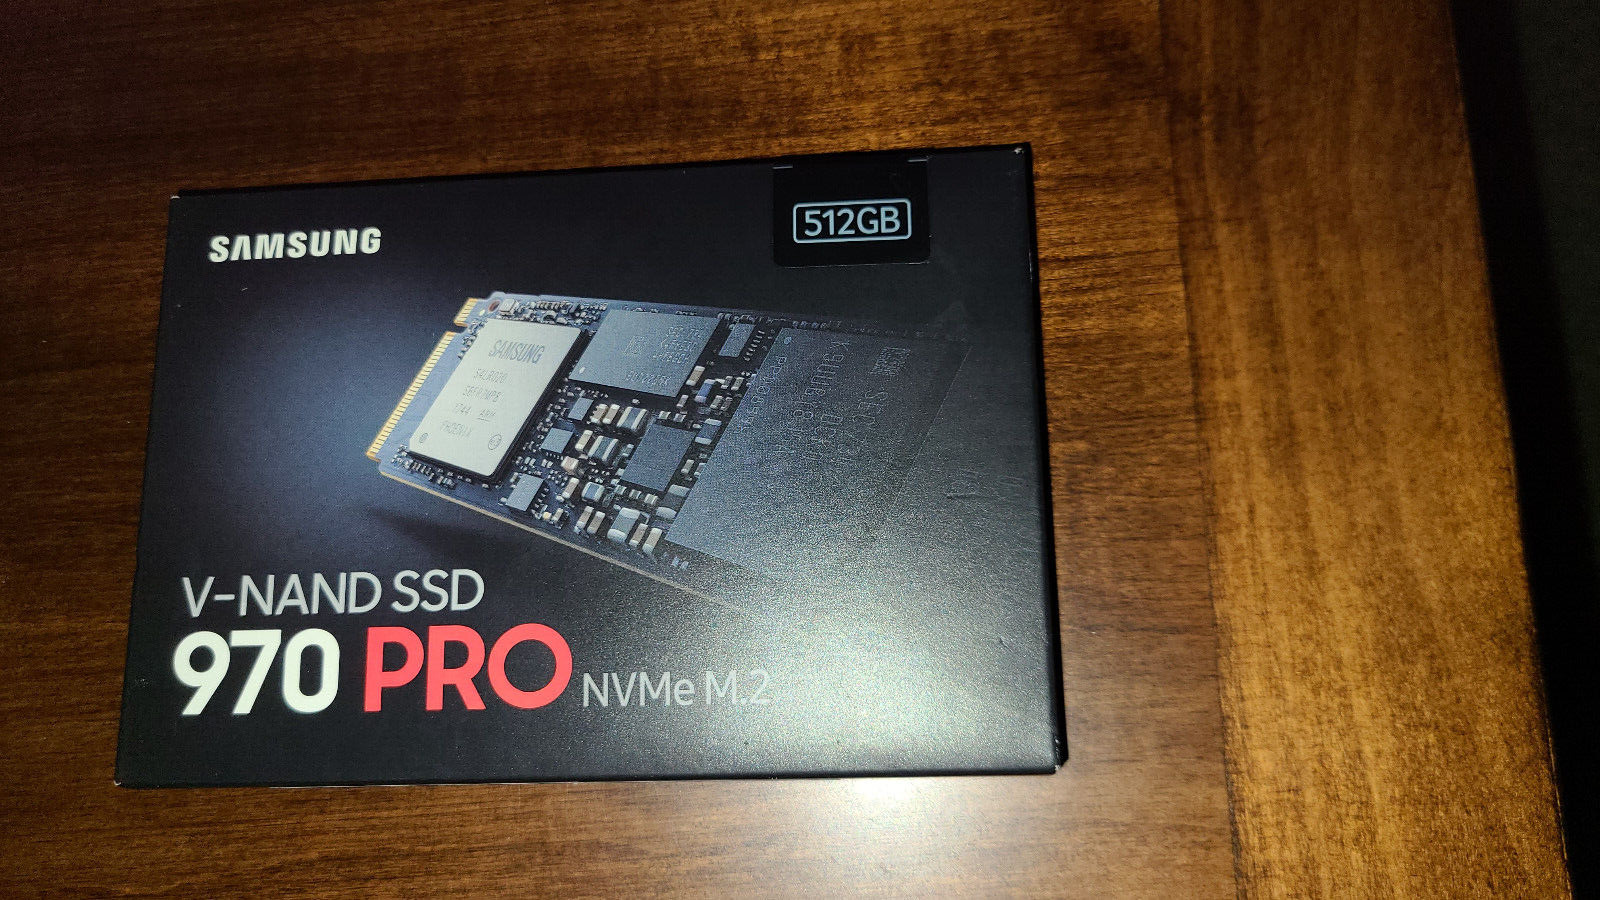 New / Open Box Samsung 970 PRO 512GB,NVMe M.2 (MZ-V7P512) Solid State Drive